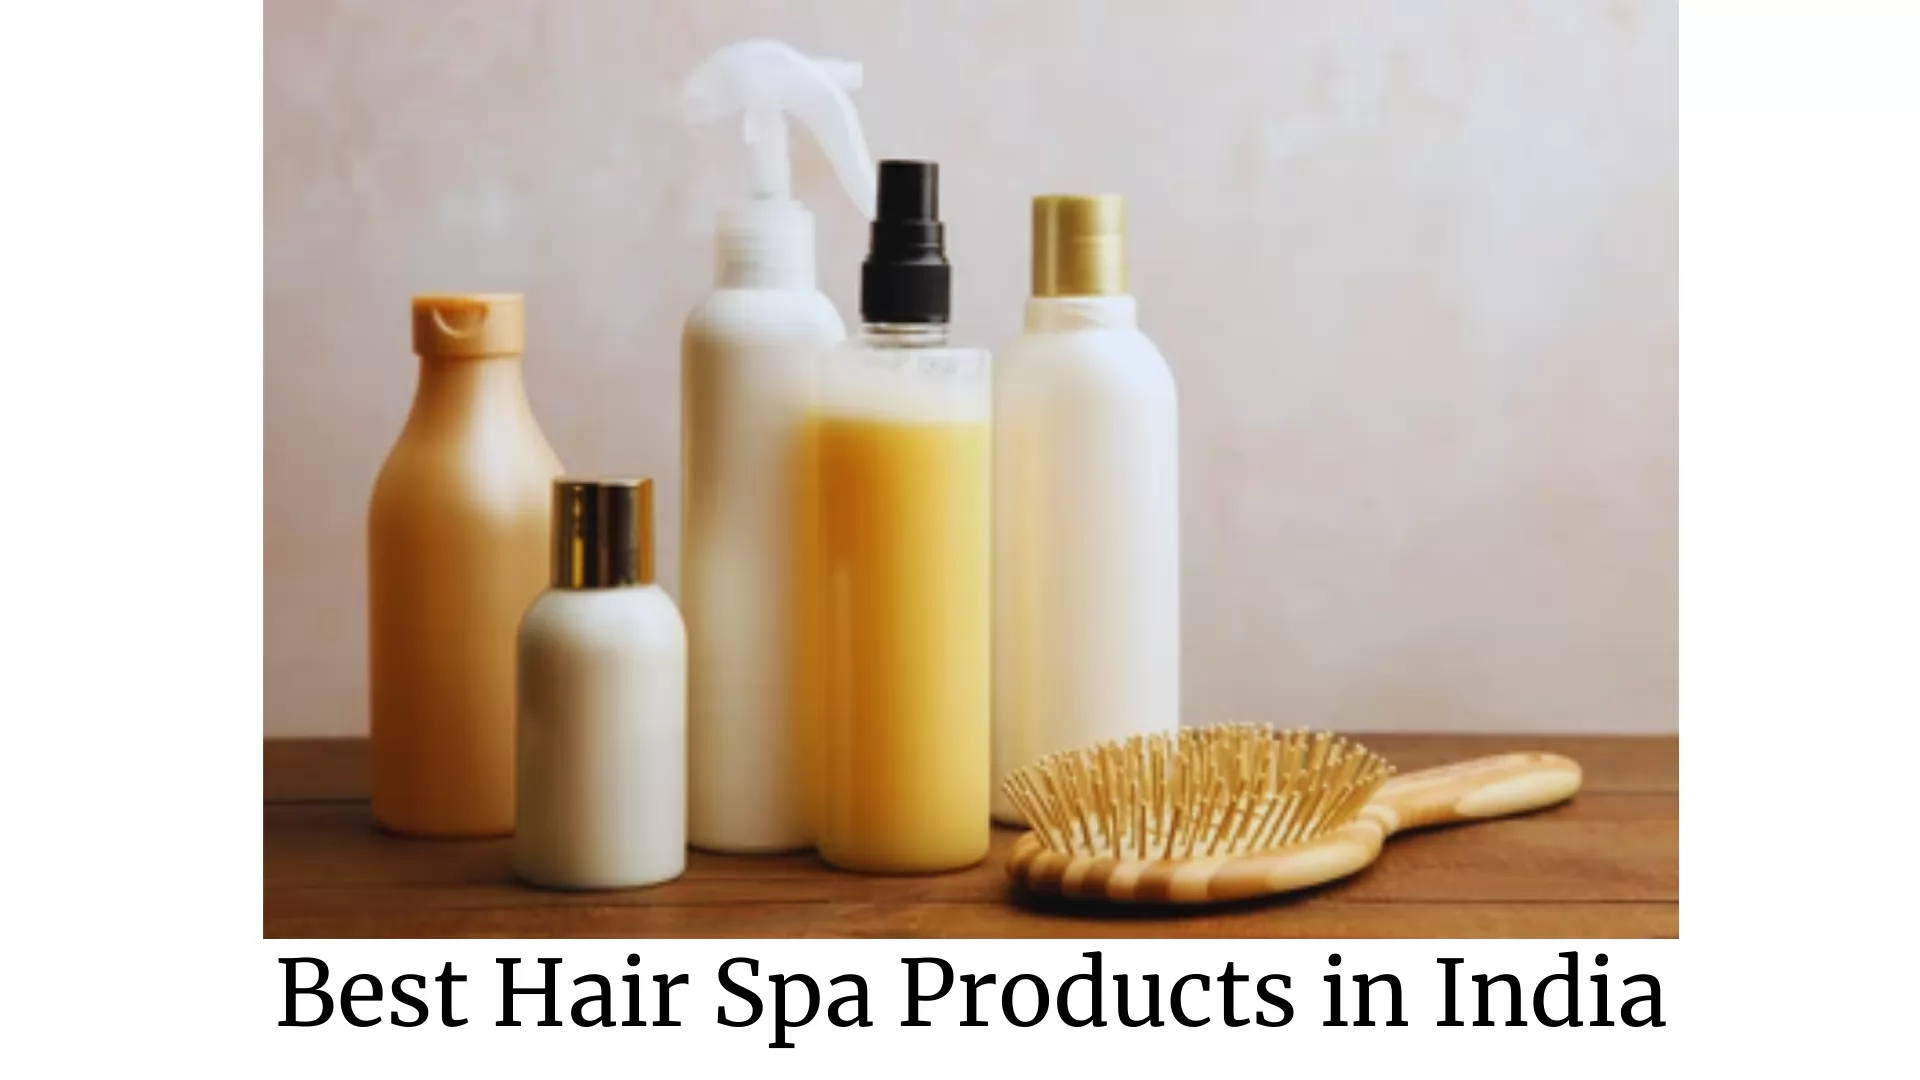 Best Hair Spa Products in India